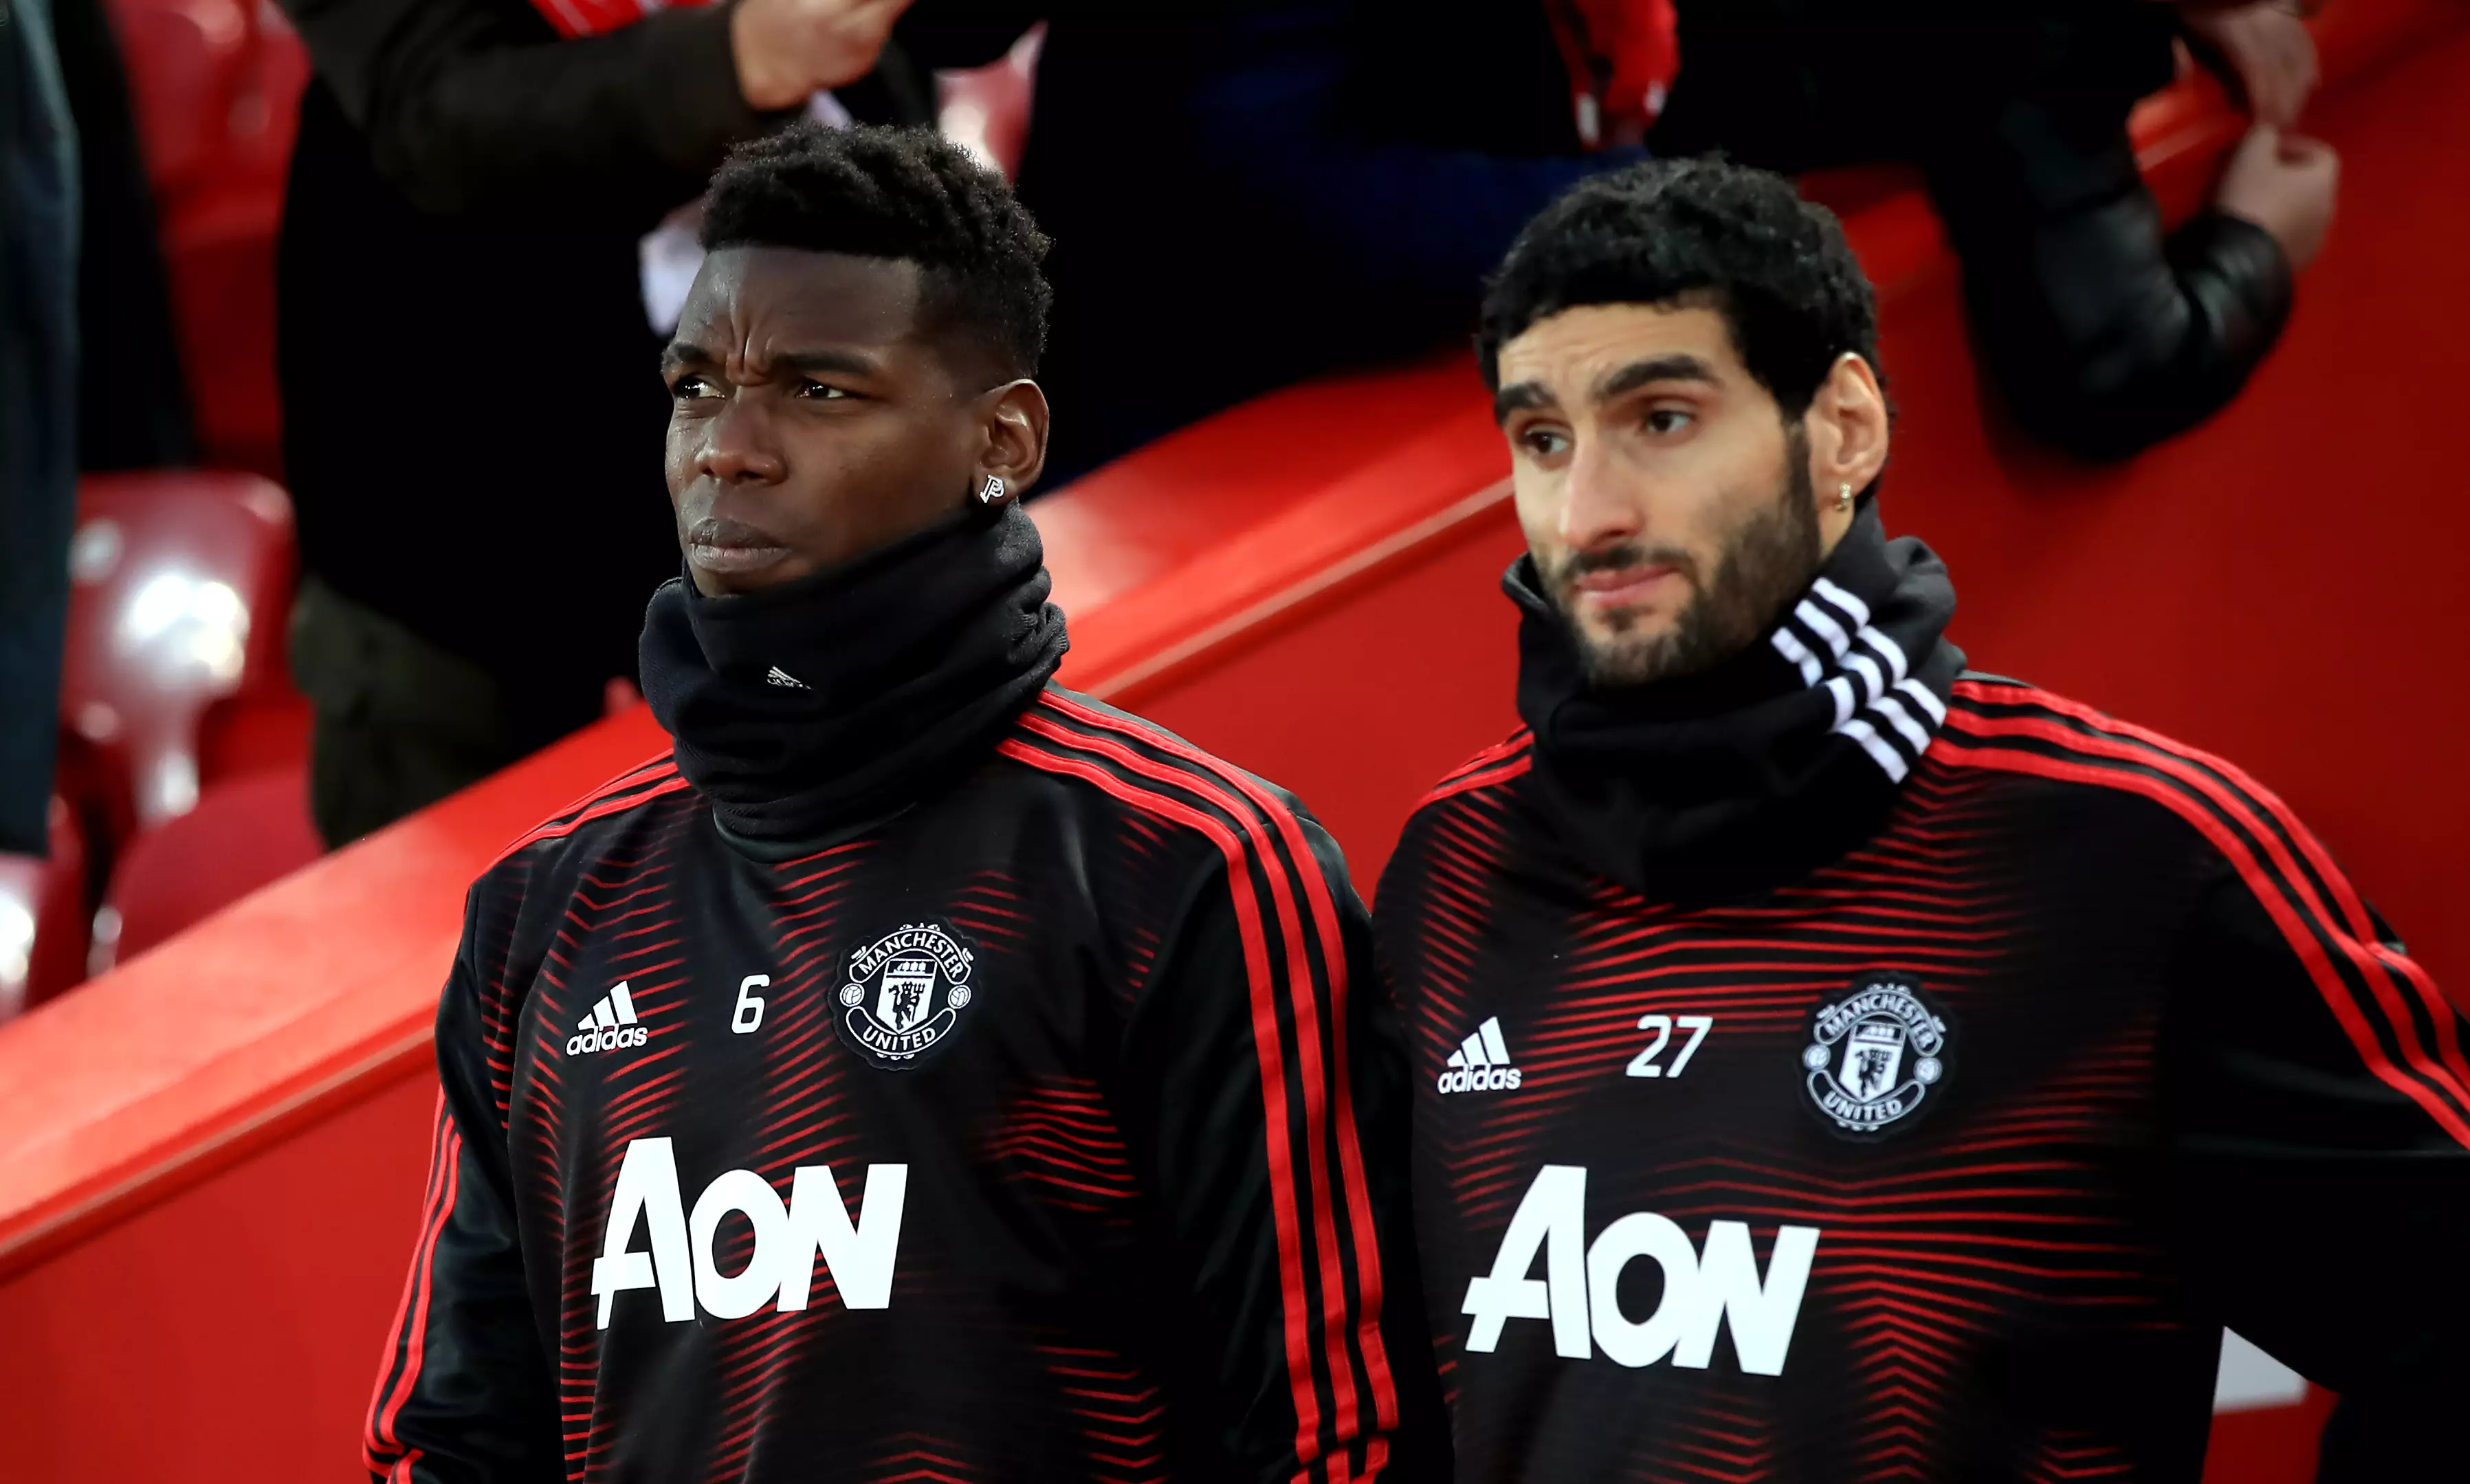 The low point for Pogba was being left on the bench against Liverpool. His form improved but was gone by the end of the season. Image: PA Images